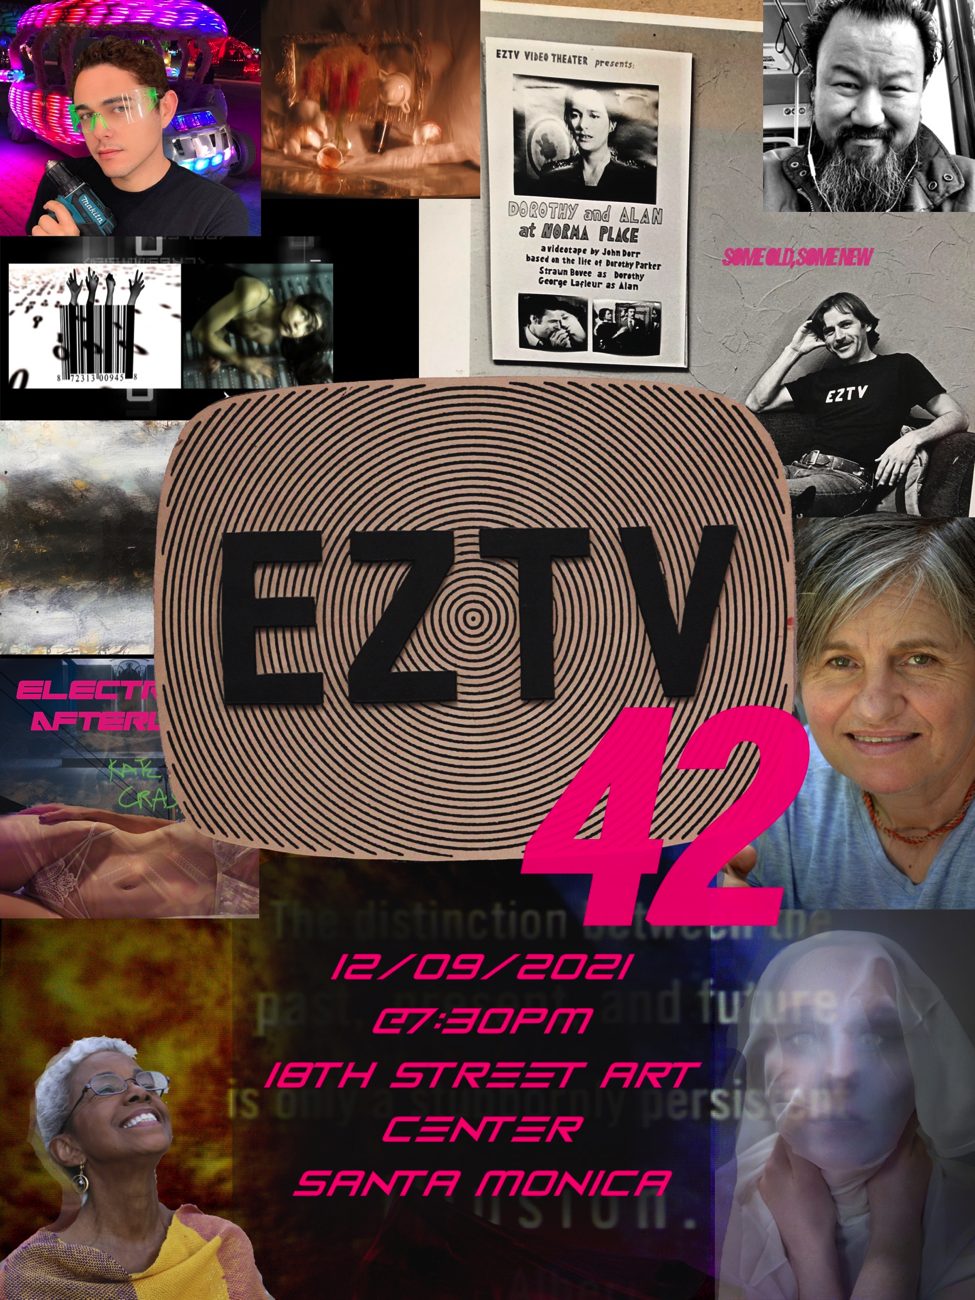 EZTV 42: Some Old, Some New